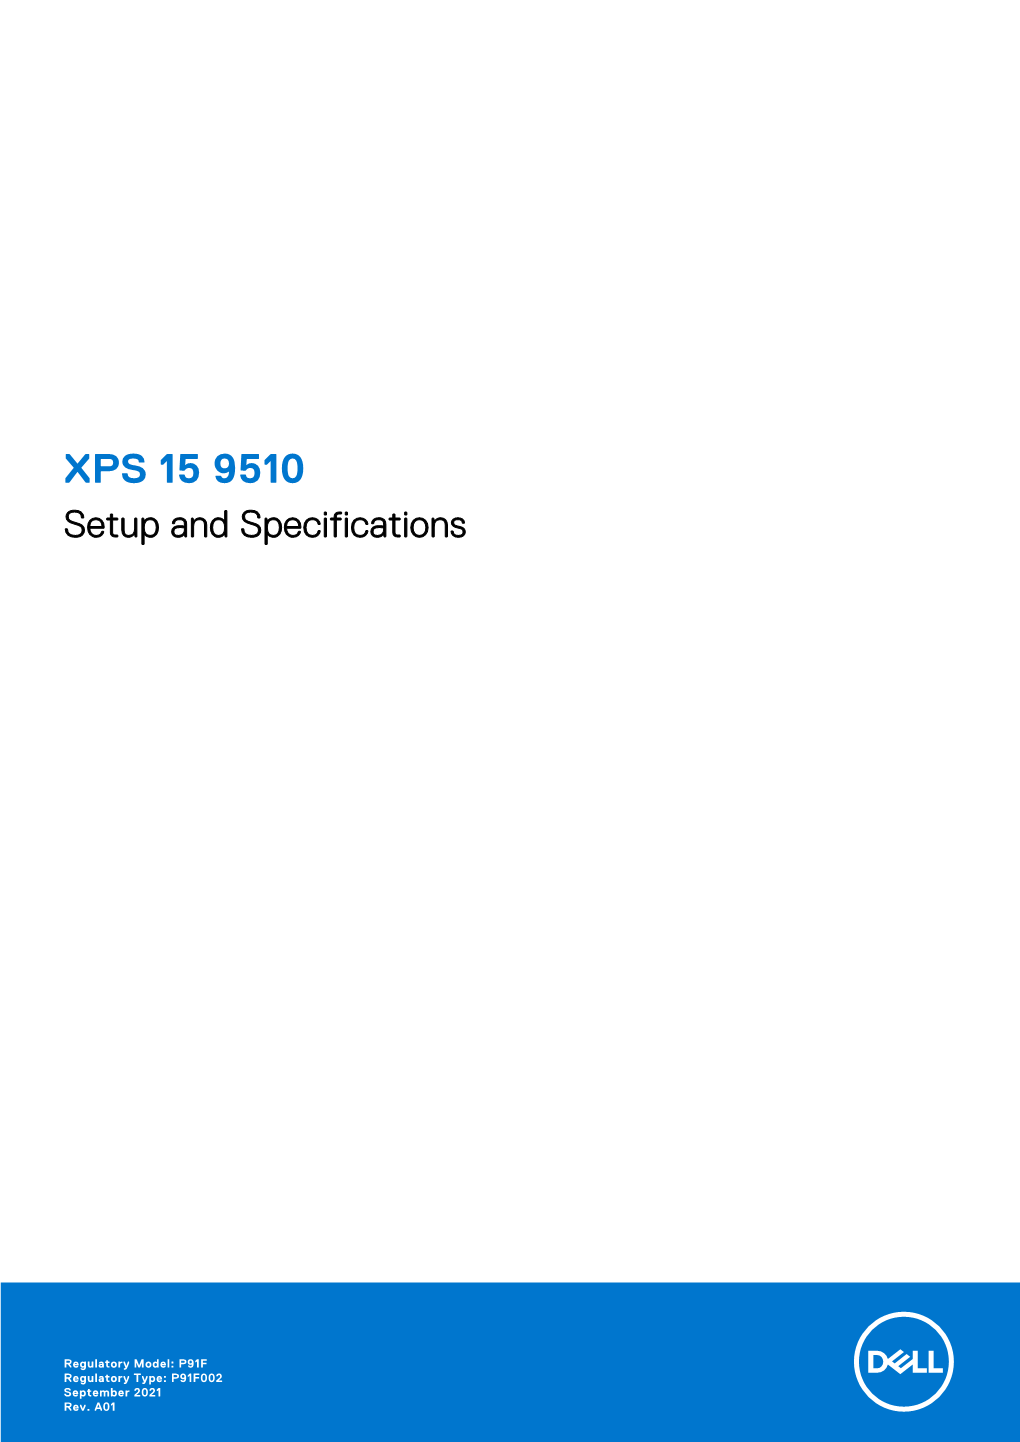 XPS 15 9510 Setup and Specifications